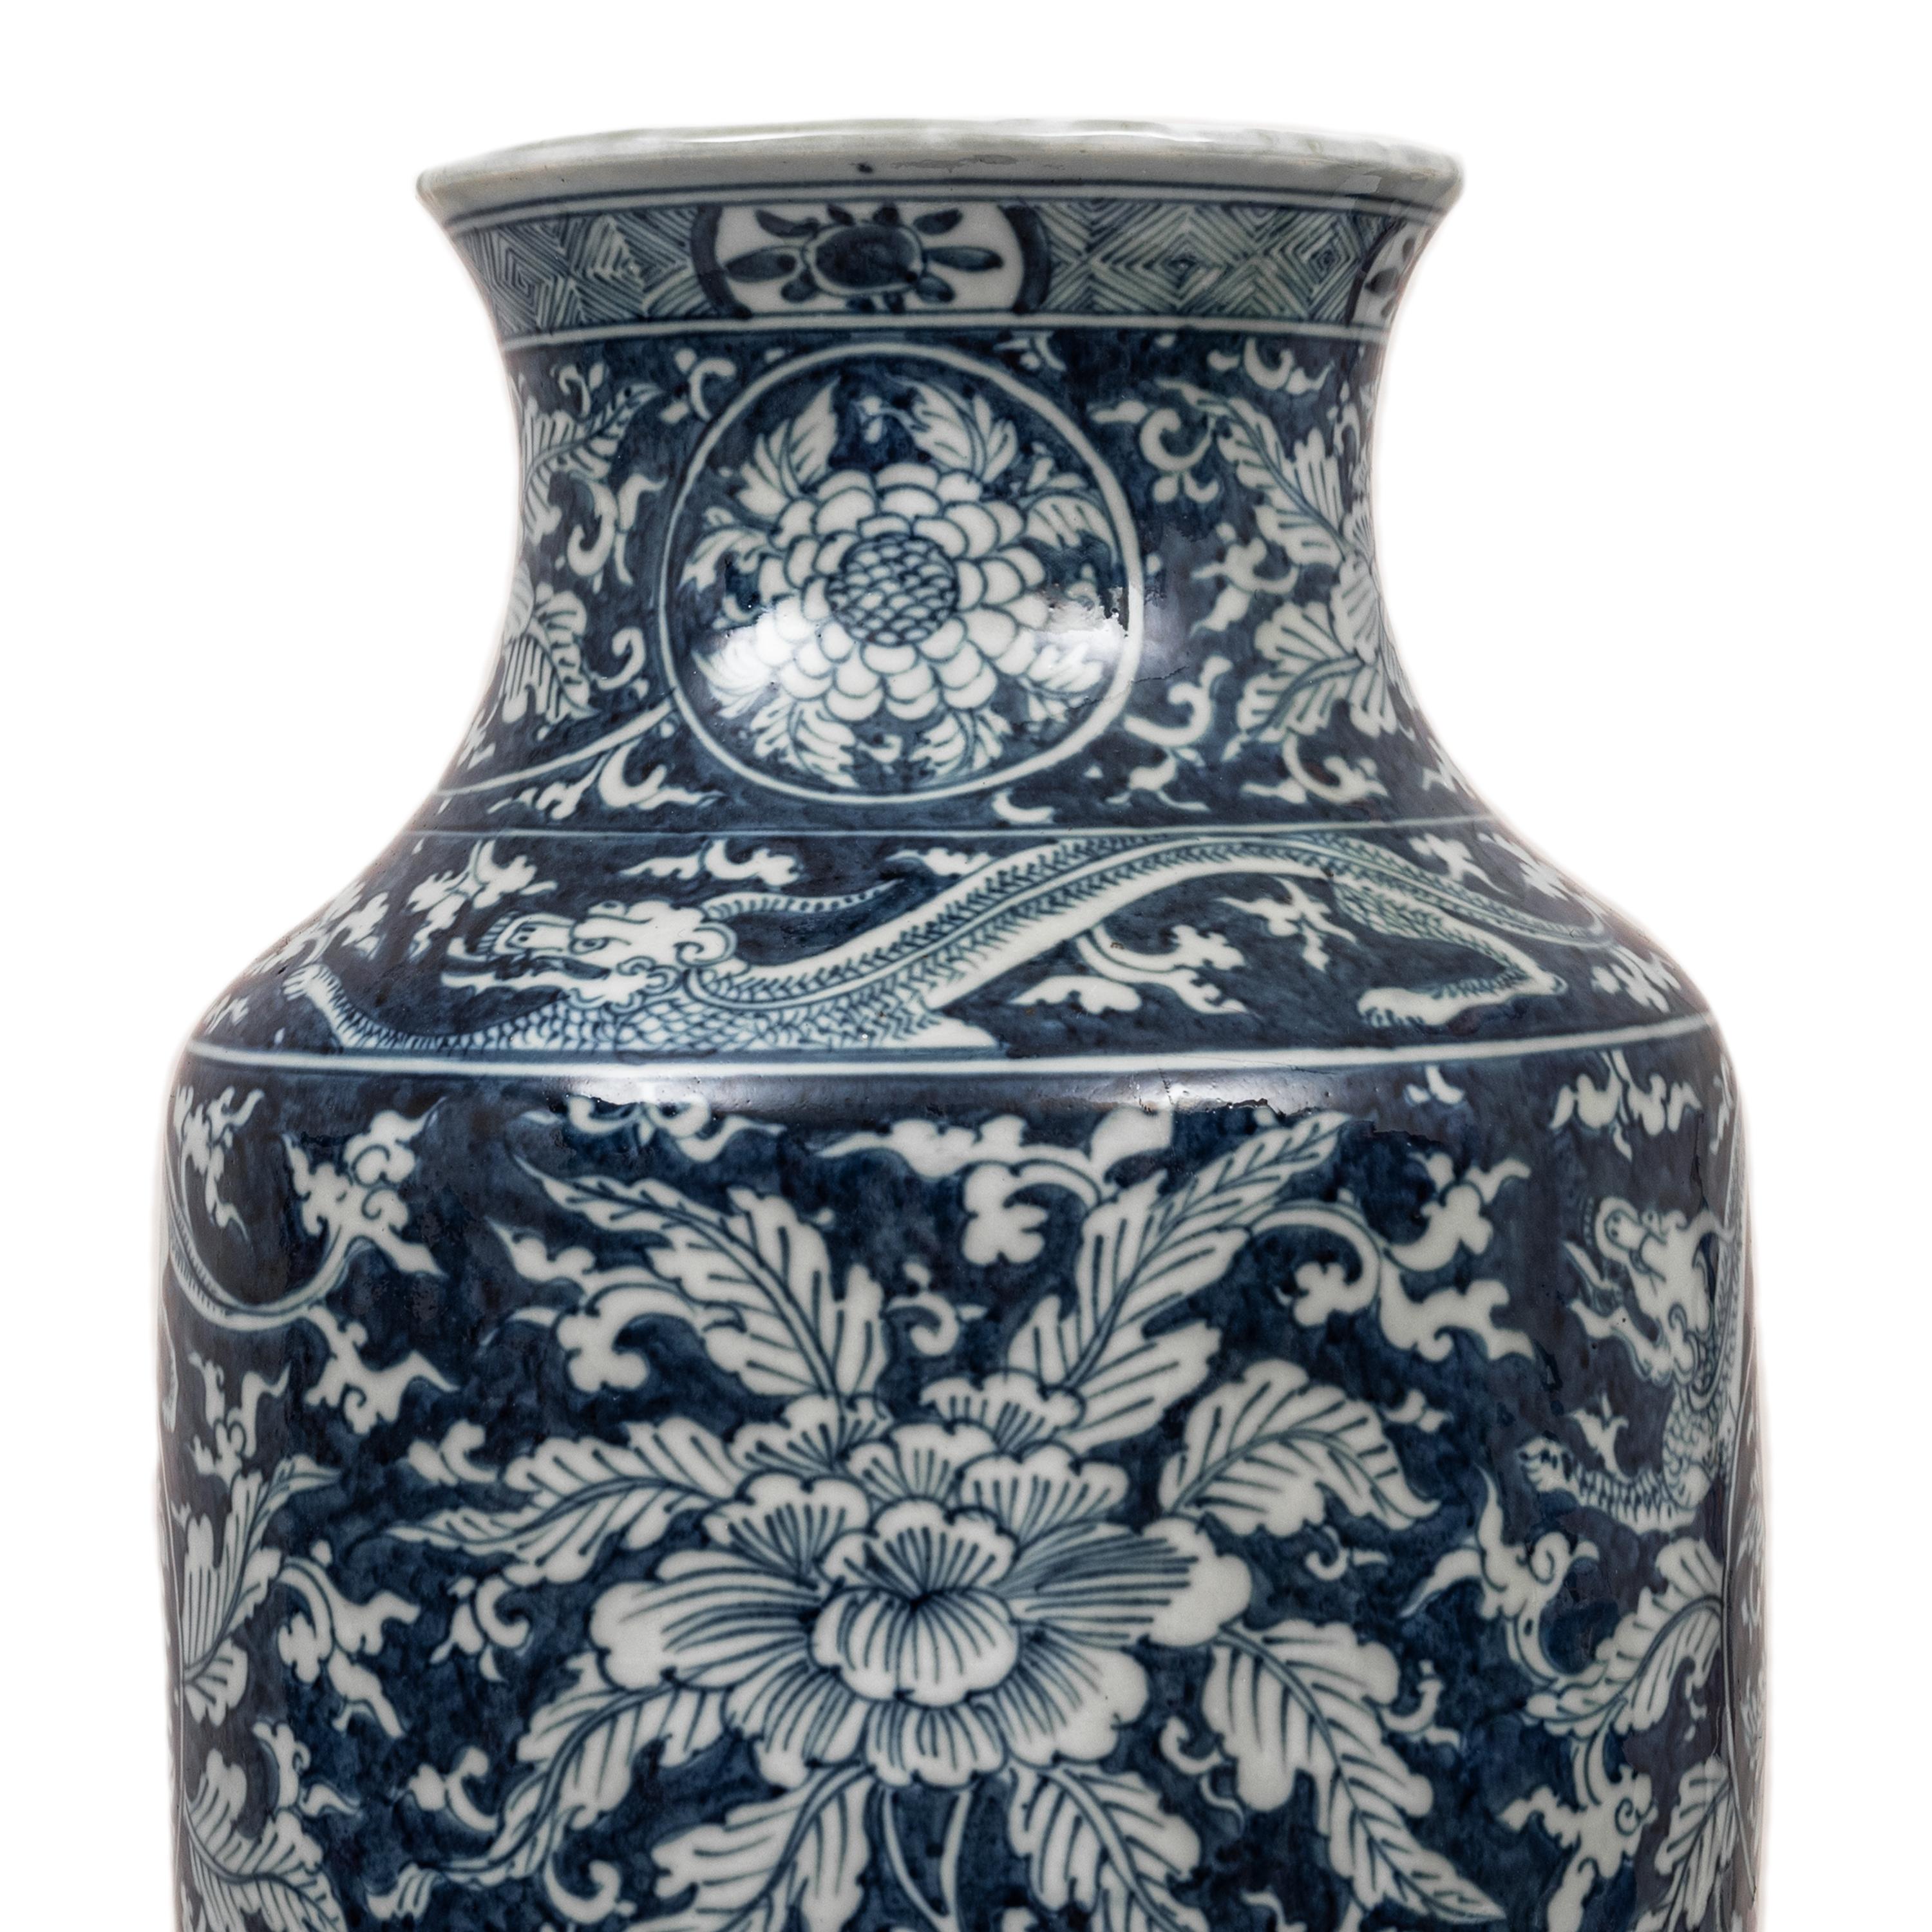 Antique Blue White Chinese Porcelain Qing Dynasty Kangxi Period Dragon Vase 1680 For Sale 2